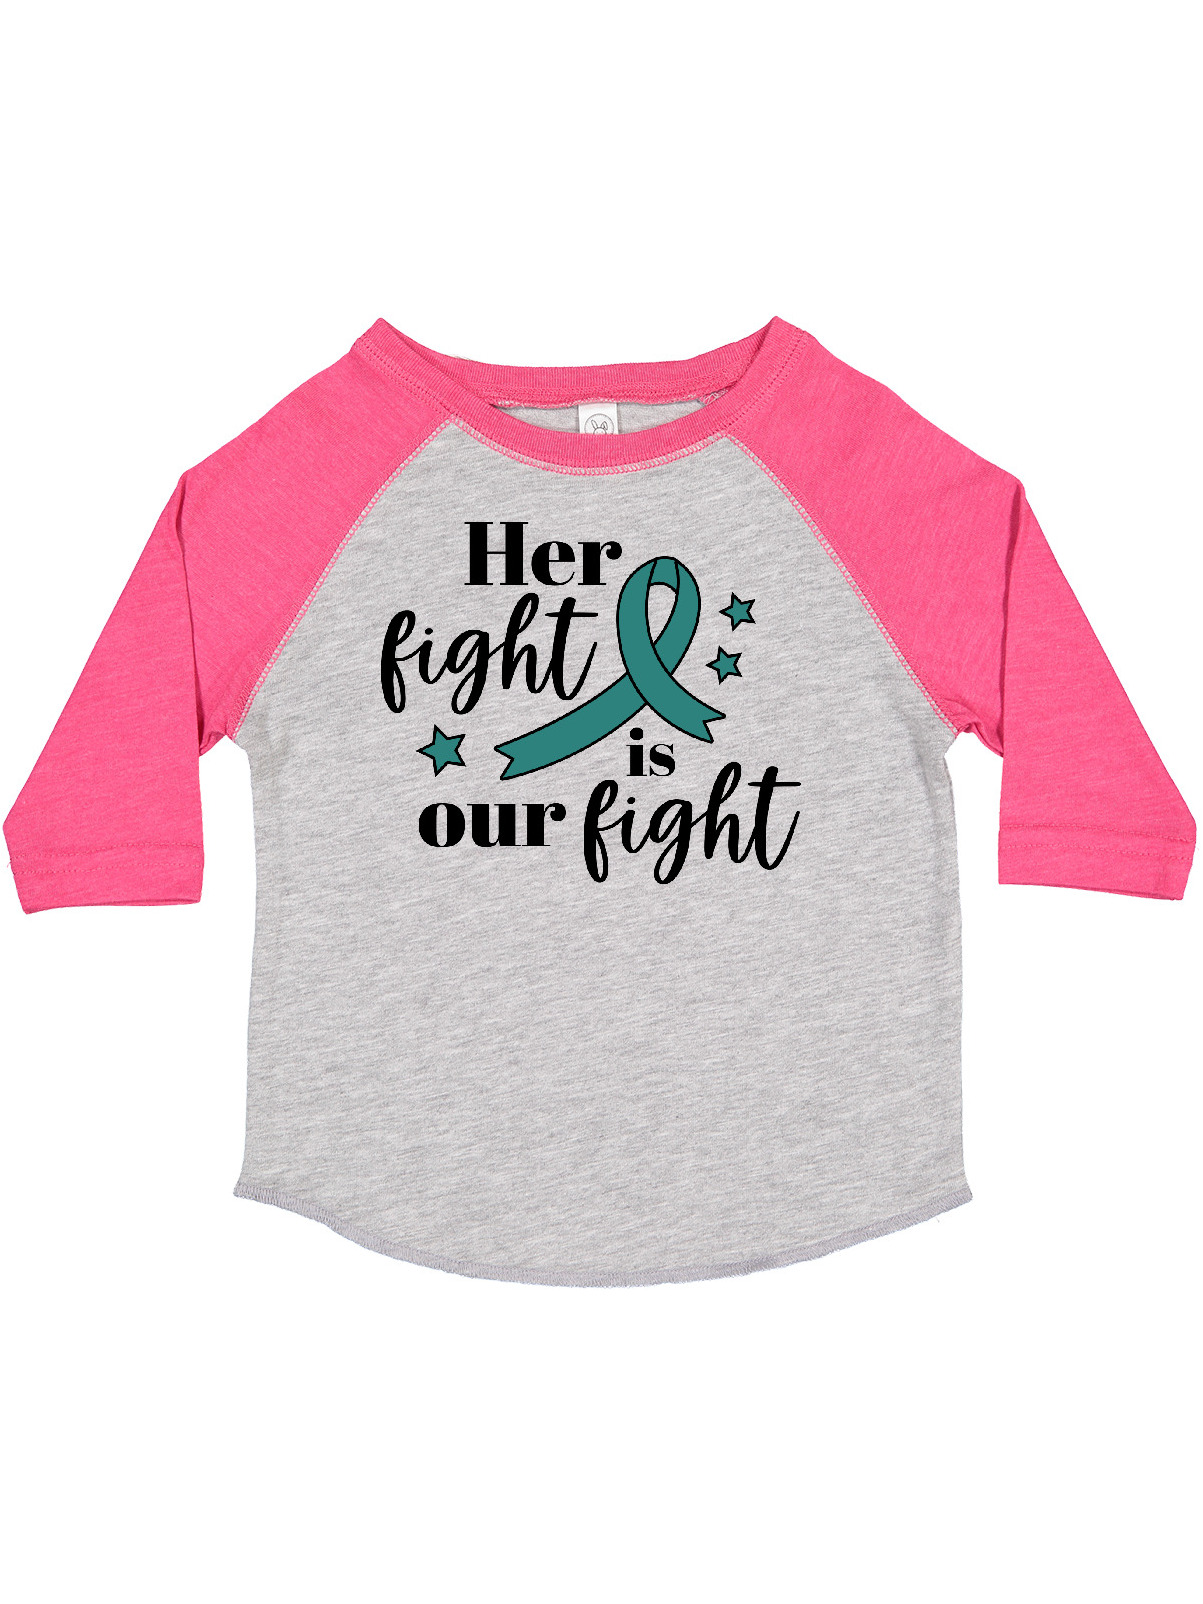 Inktastic Ovarian Cancer Her Fight is our Fight with Teal Ribbon Boys or Girls Toddler T-Shirt - image 1 of 4